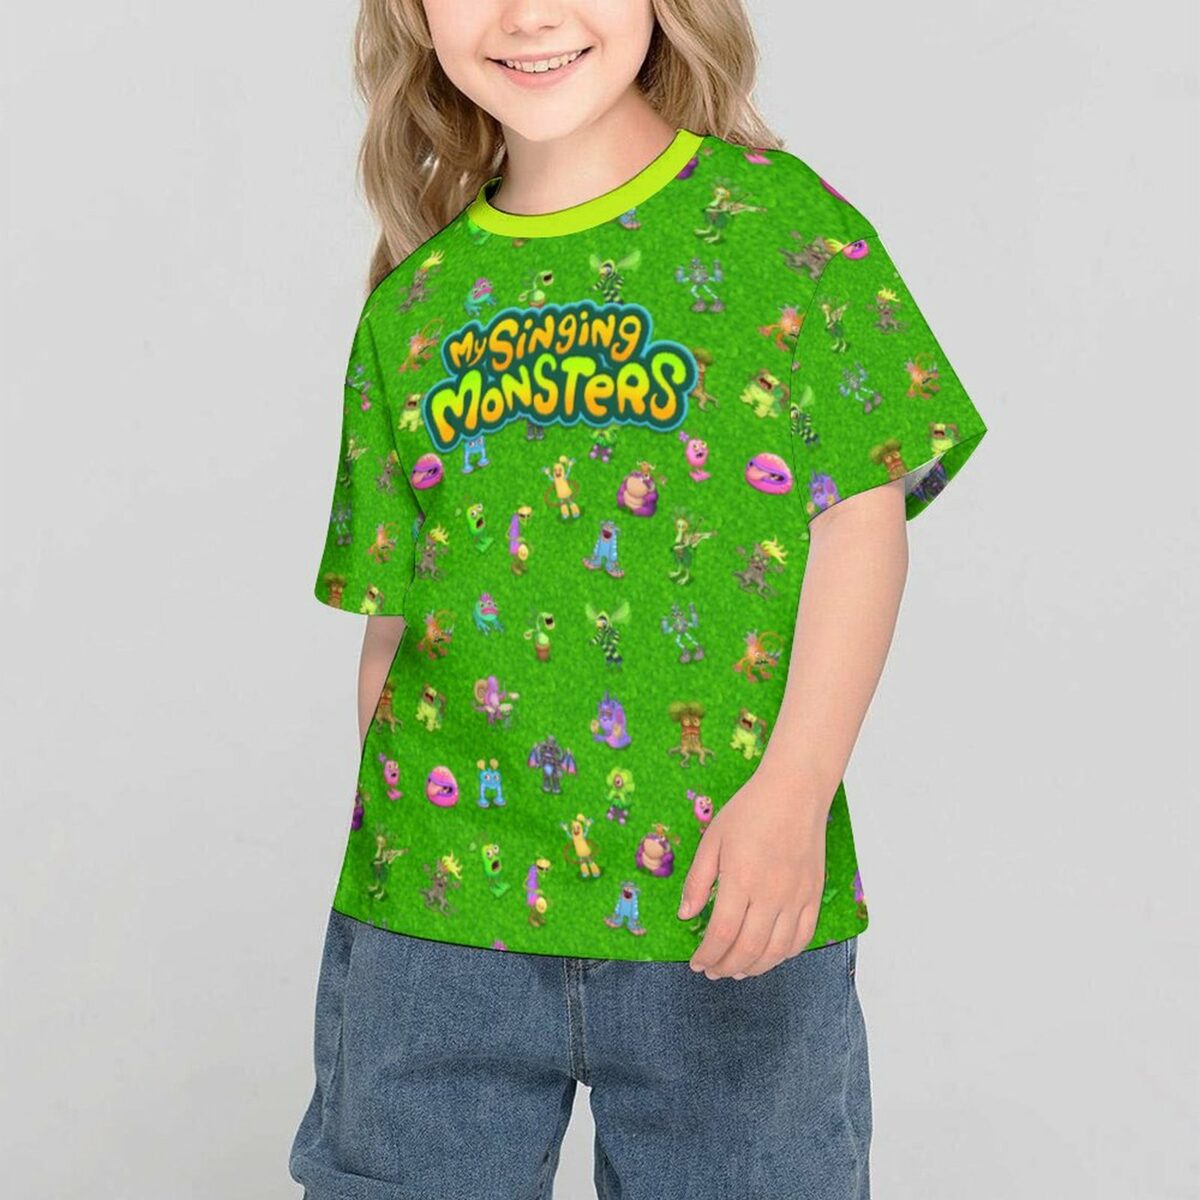 My Singing Monsters T-shirt for Teens (All-Over Printing) Cool Kiddo 20